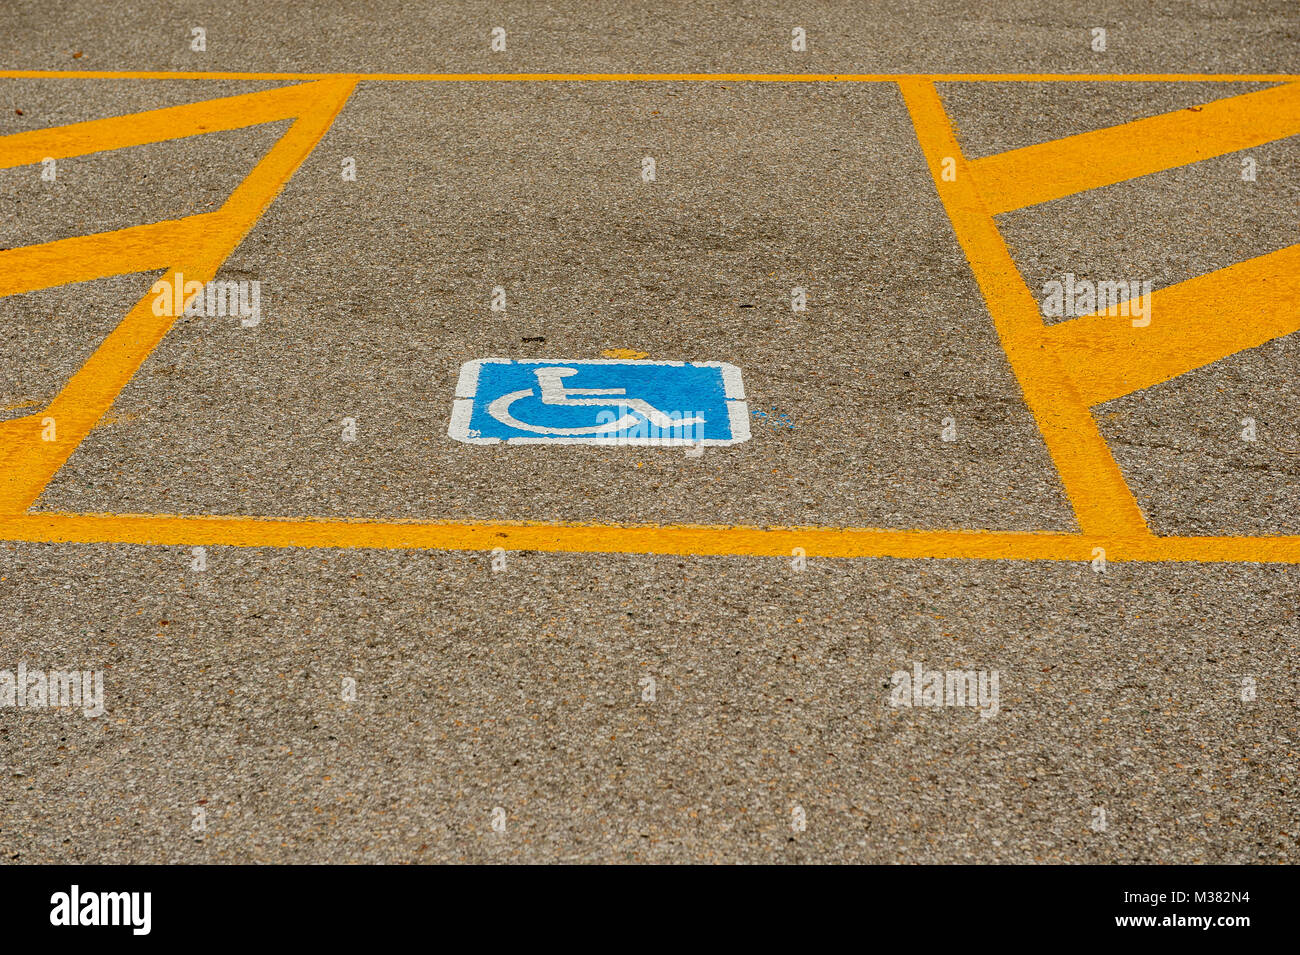 parking space reserved for disabled people Stock Photo